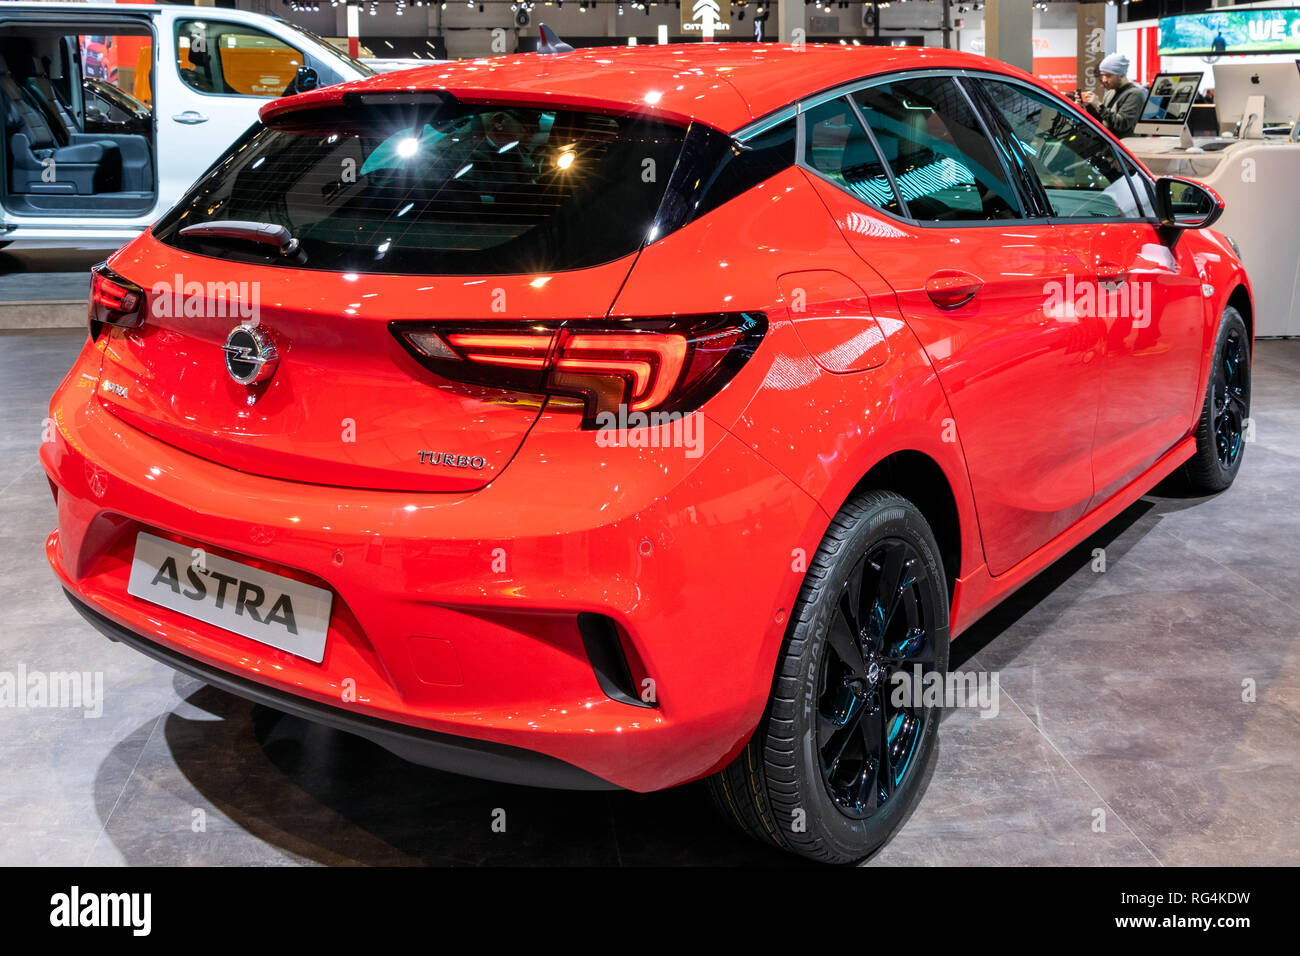 Opel Astra High Resolution Stock Photography and Images - Alamy